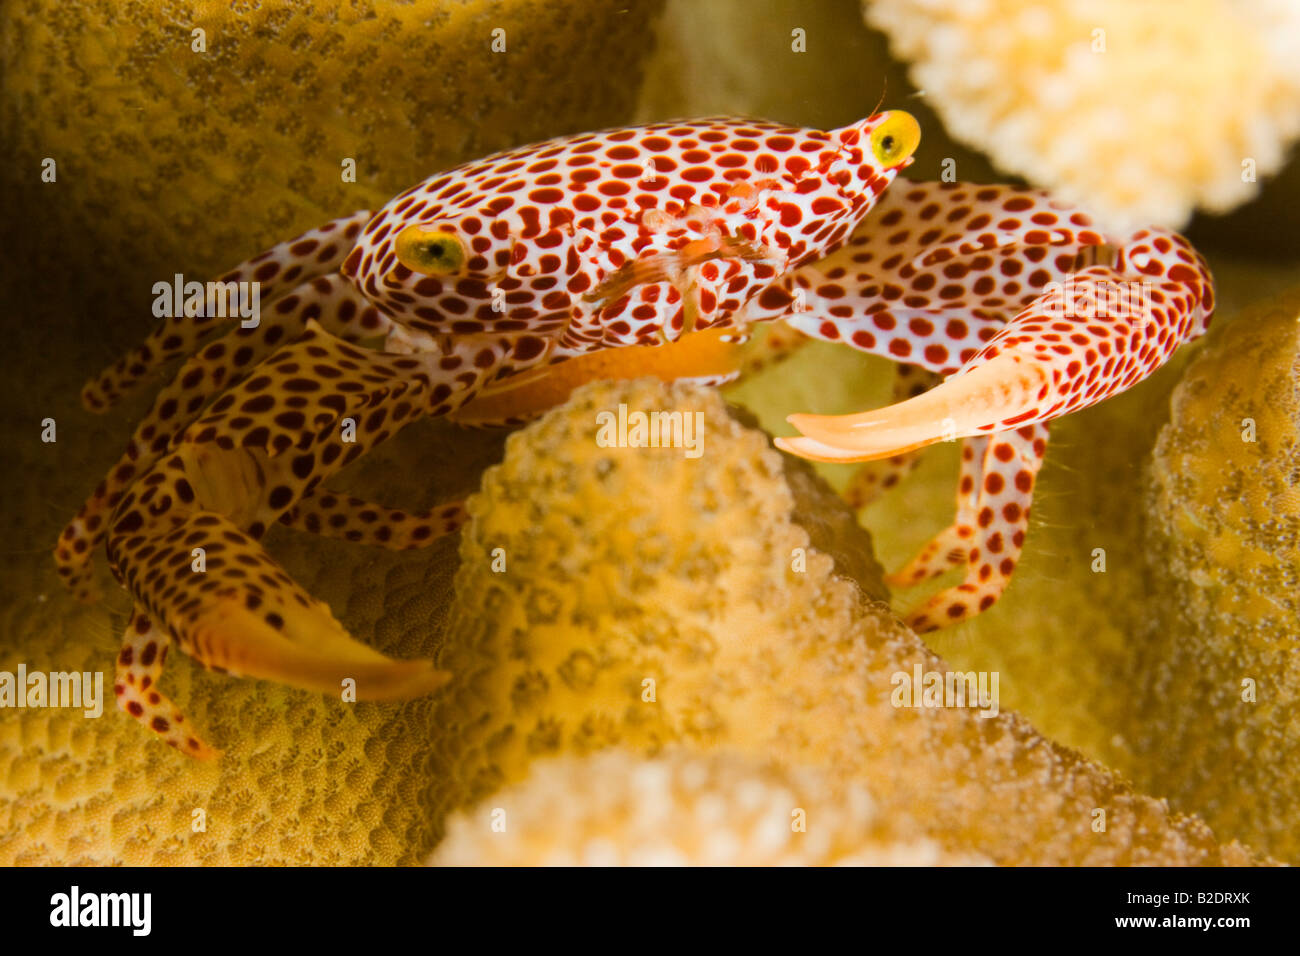 Red spotted guard crab, Trapezia tigrina, with eggs, in antler coral, Pocillopora eydouxi, Island of Yap, Micronesia. Stock Photo